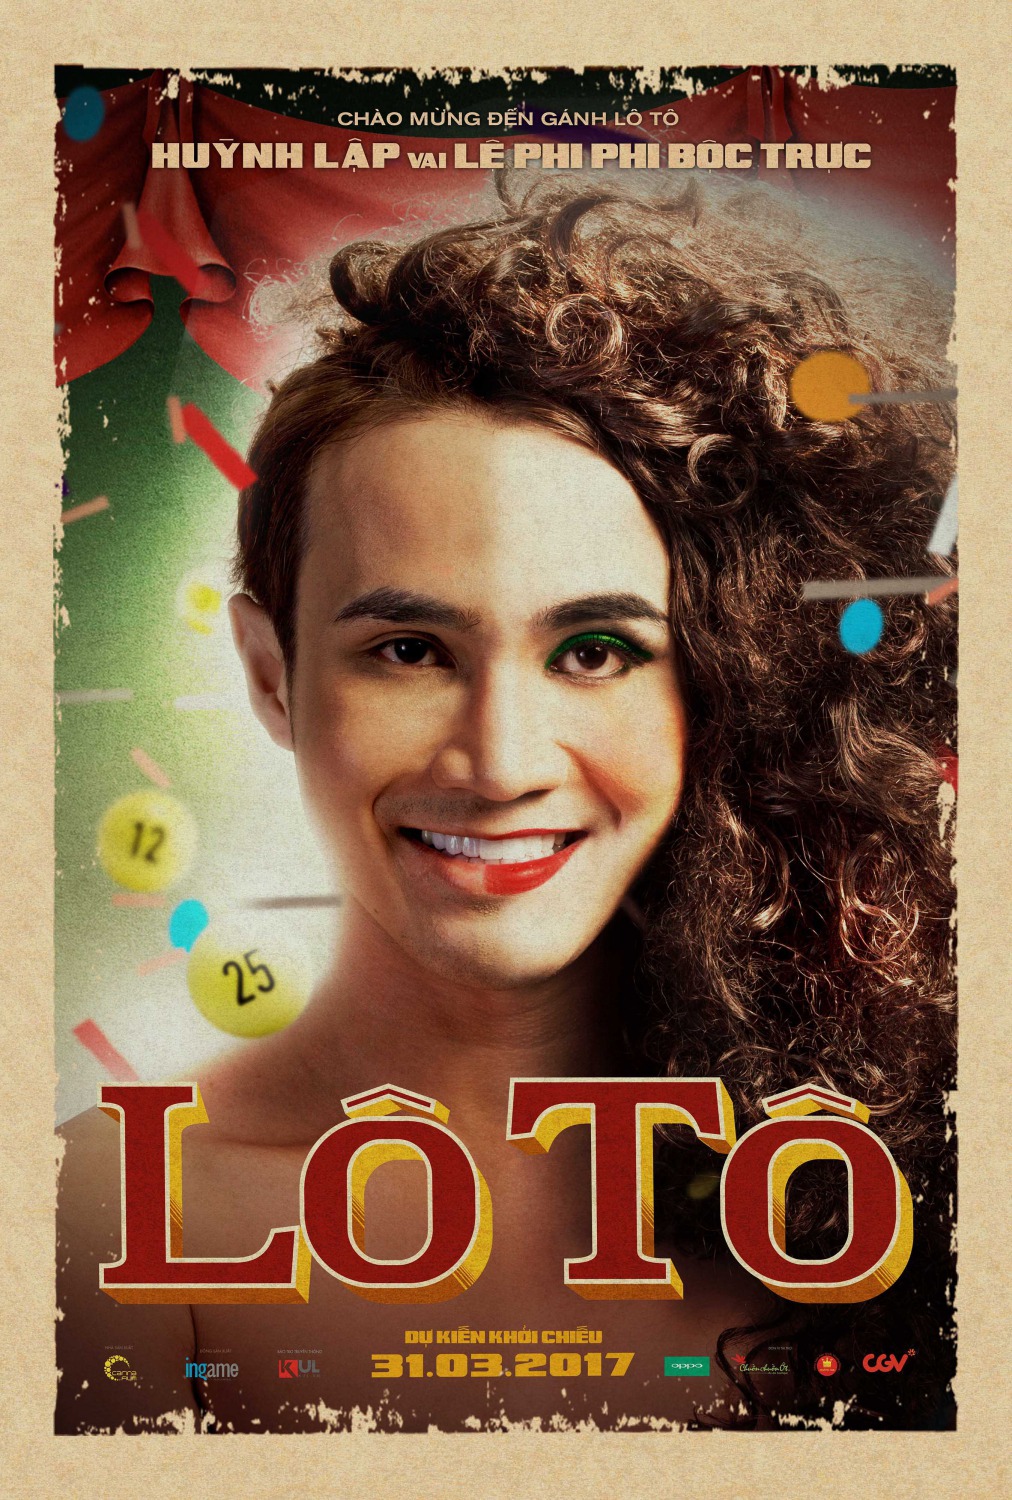 Extra Large Movie Poster Image for Lô tô (#4 of 5)